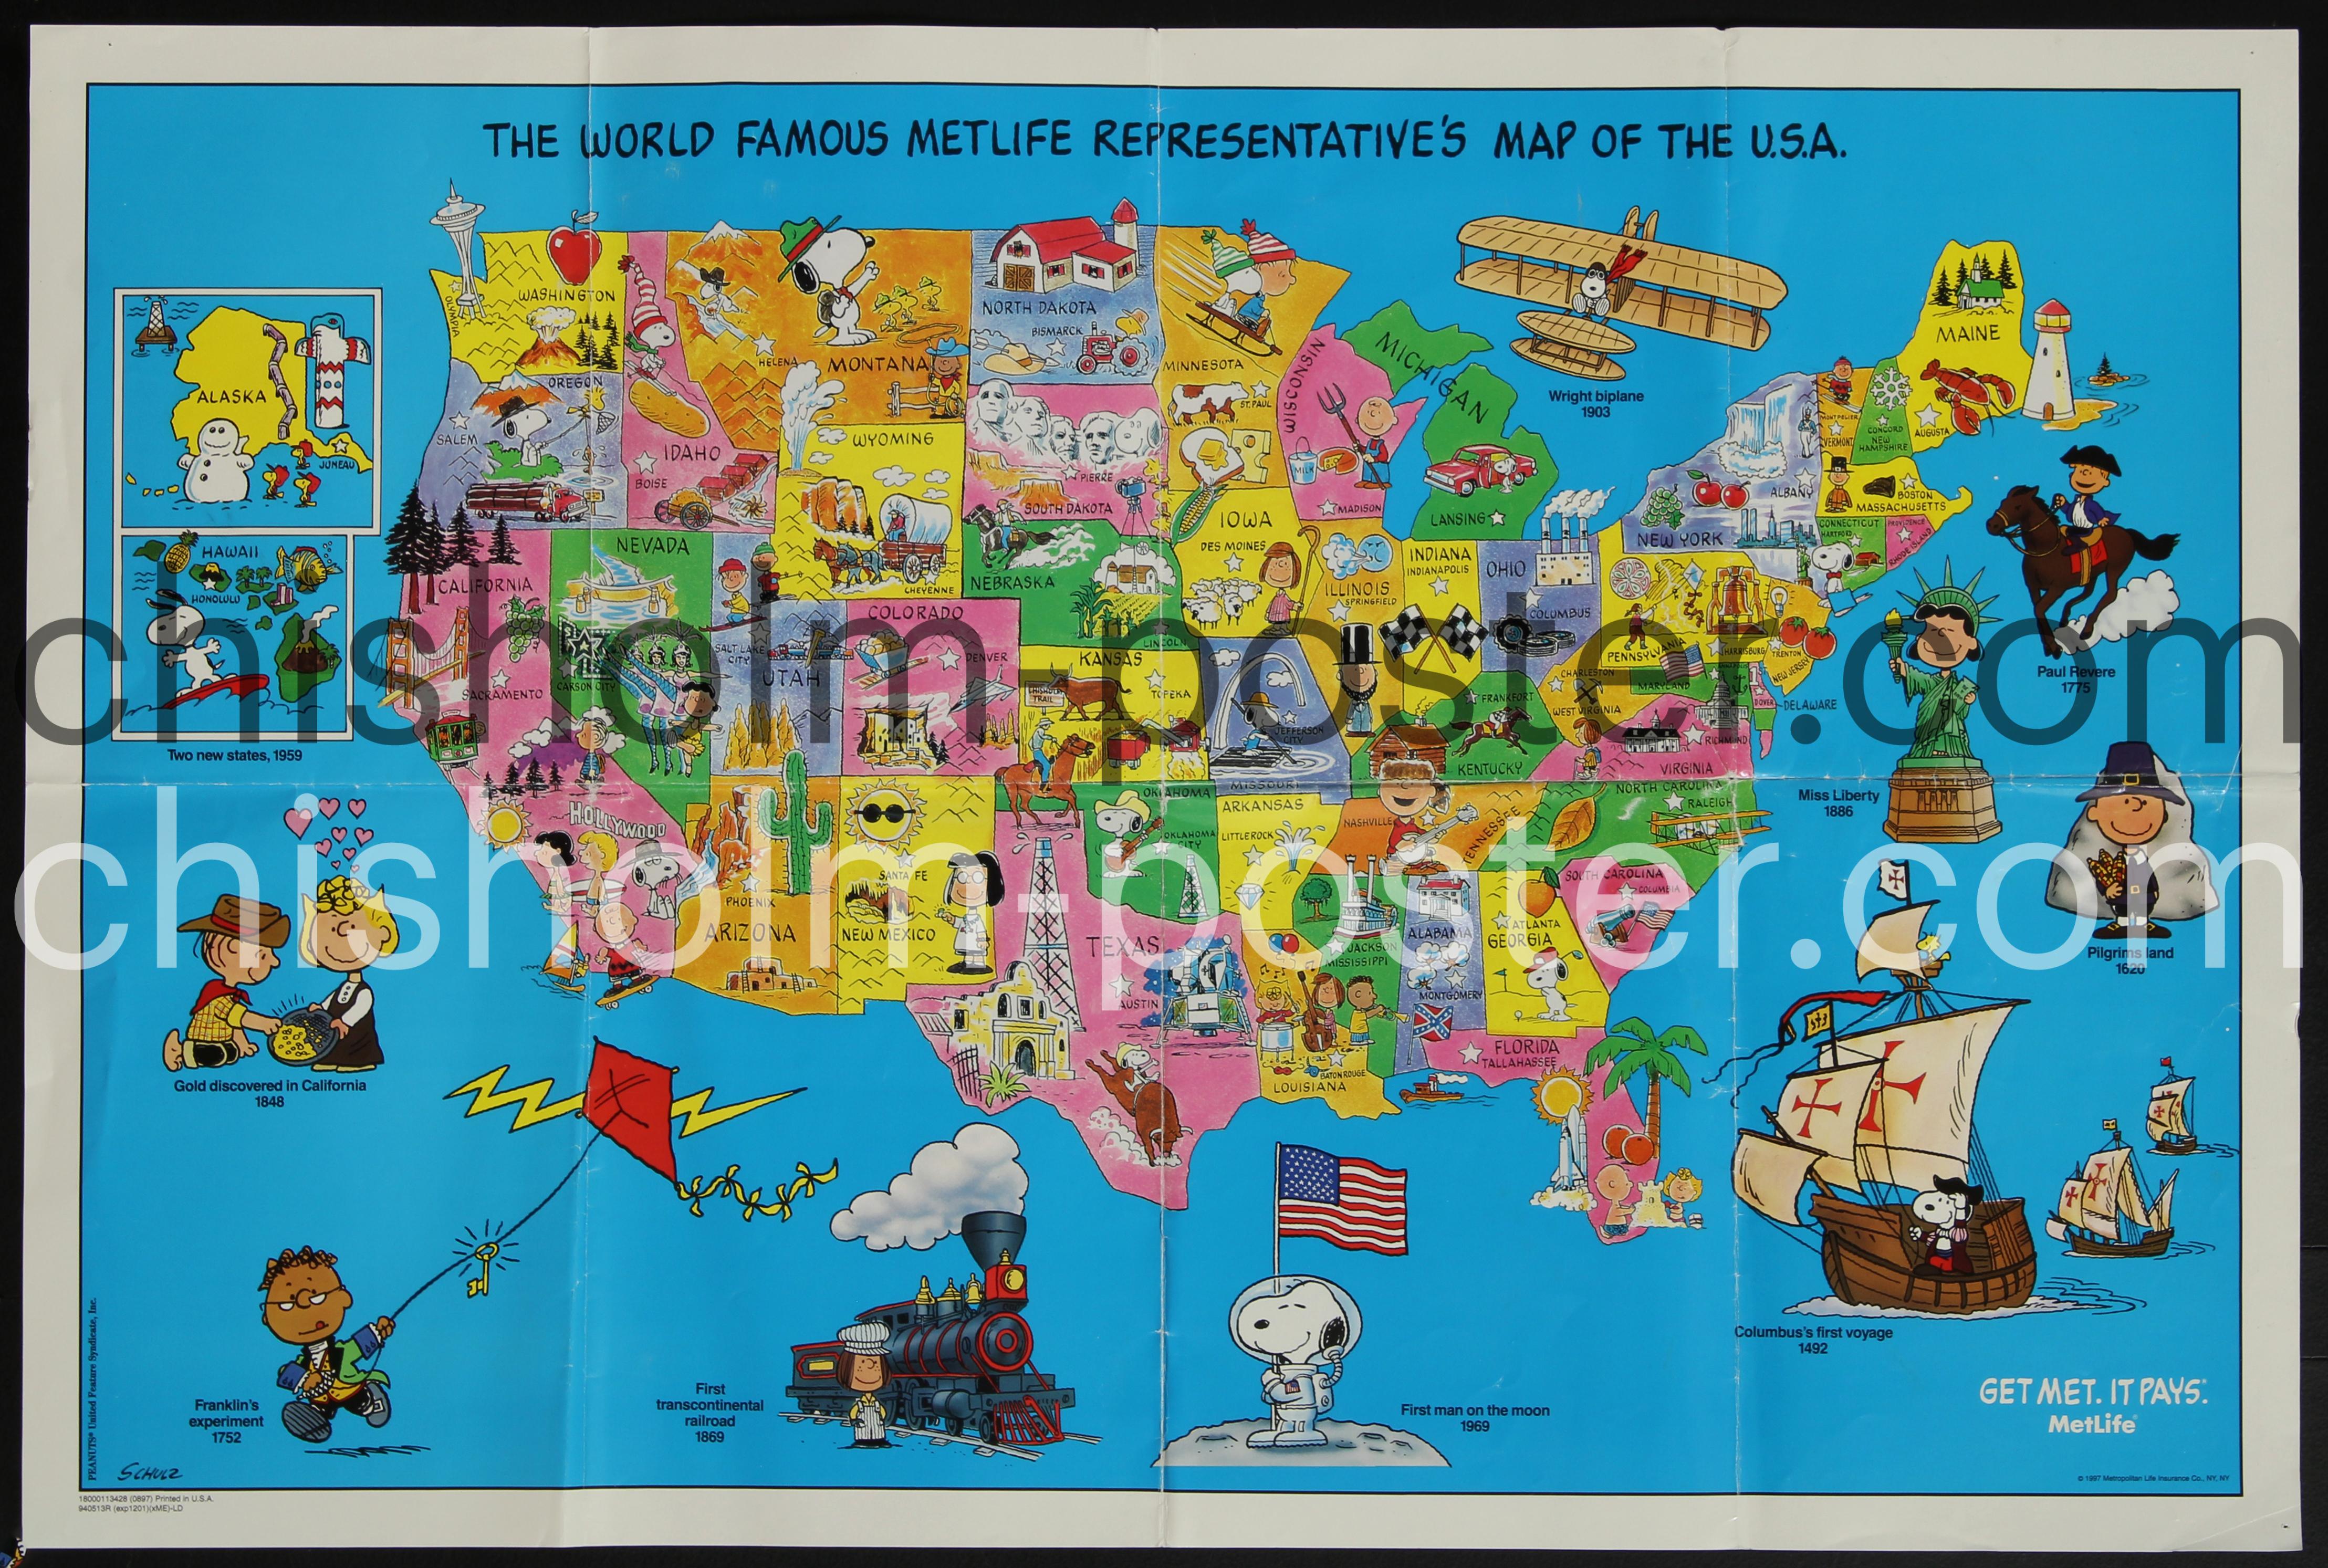 The World Famous Metlife Representative's Map of the USA - Peanuts 